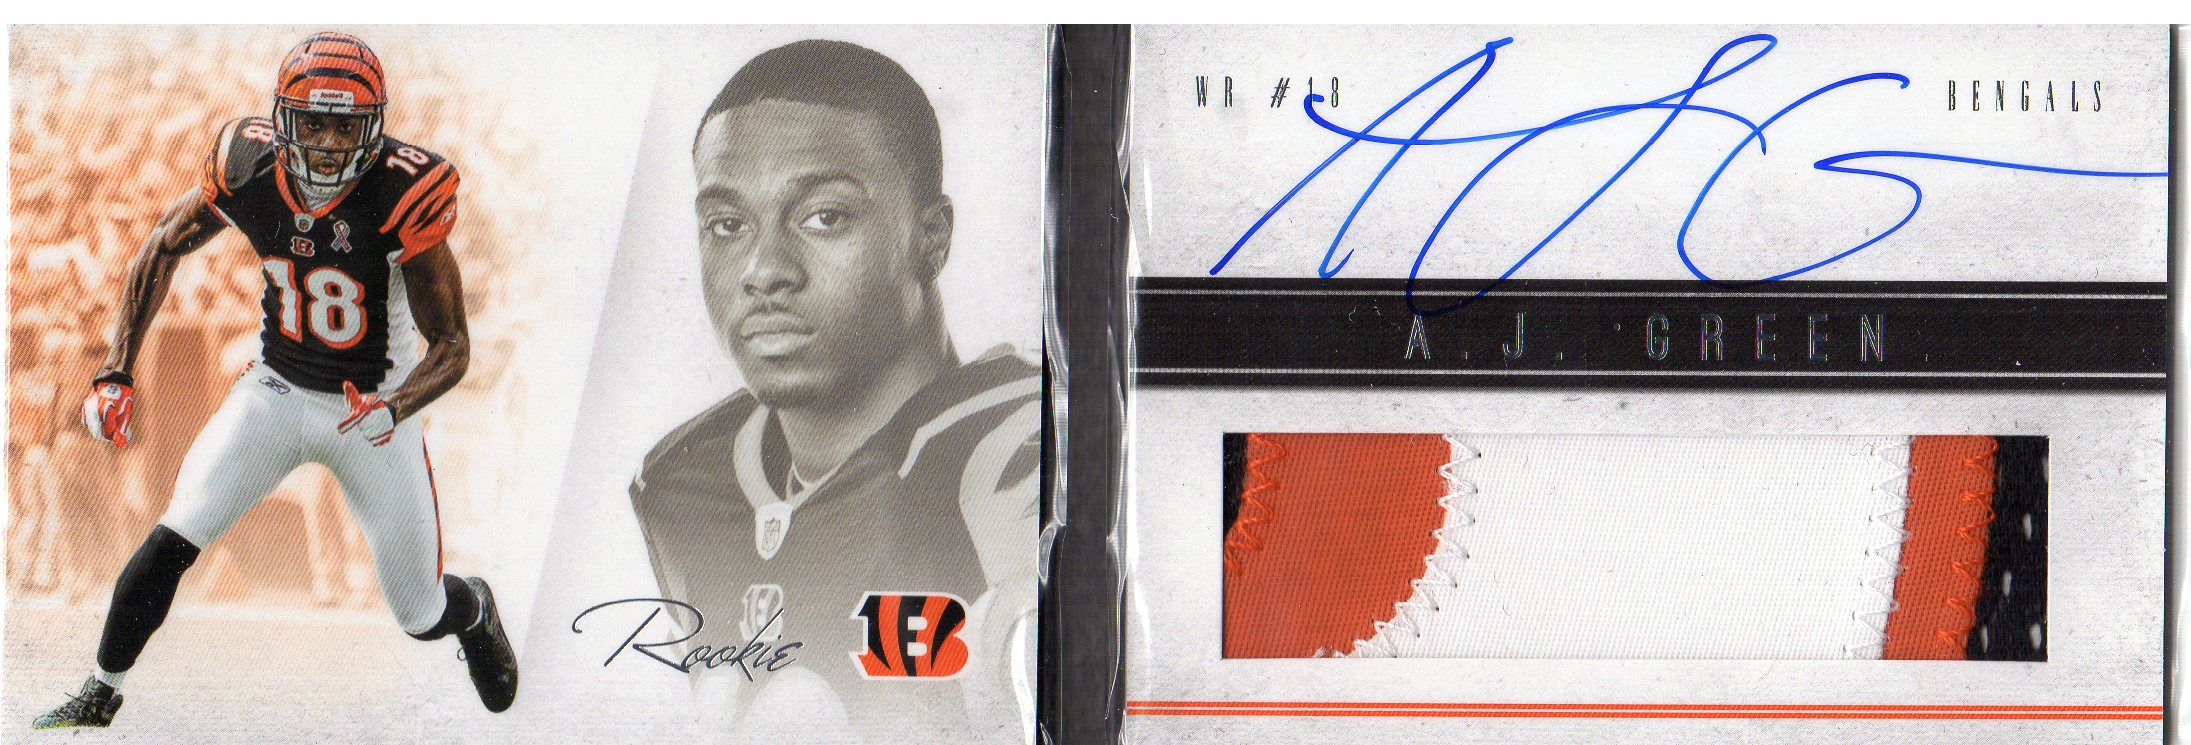  A.J. Green player image